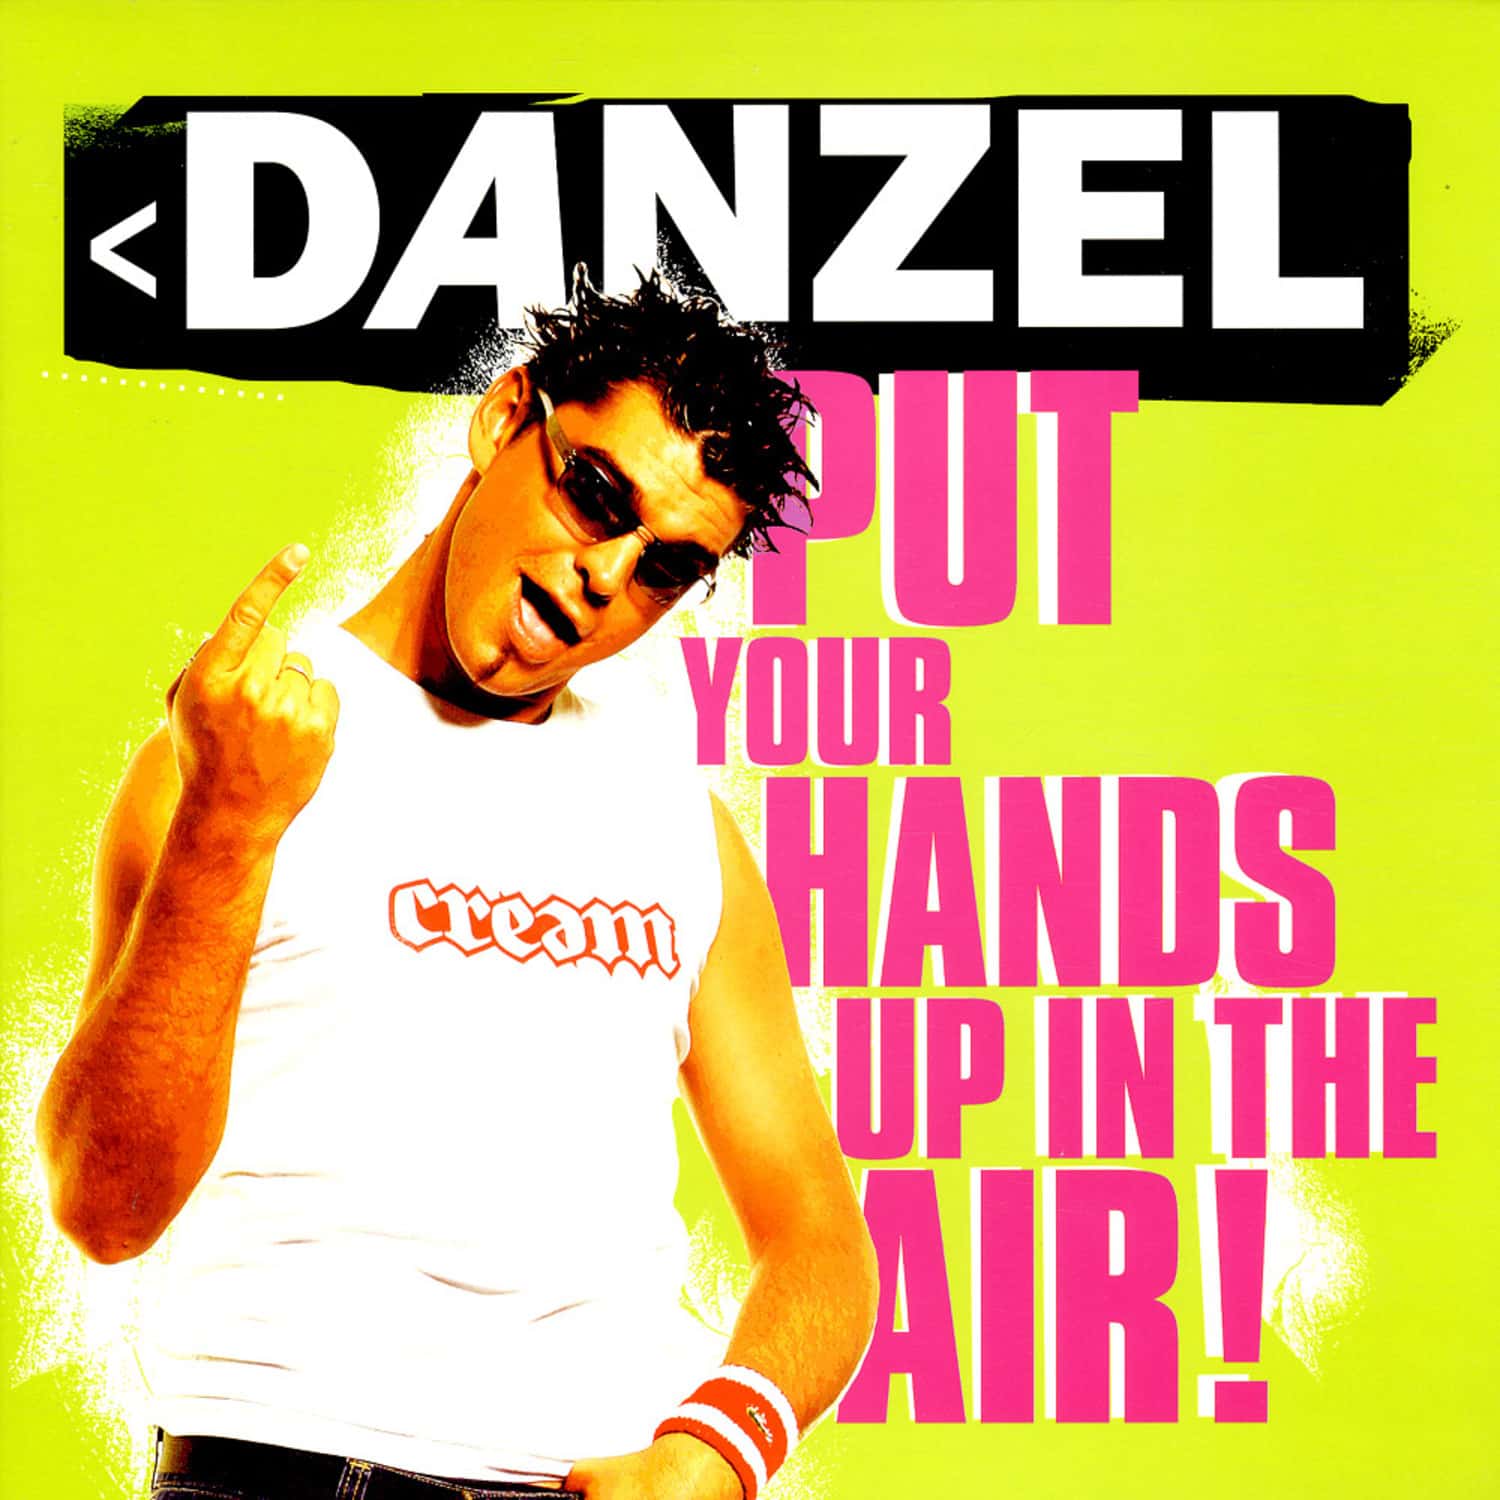 Danzel - PUT YOUR HANDS UP IN THE AIR